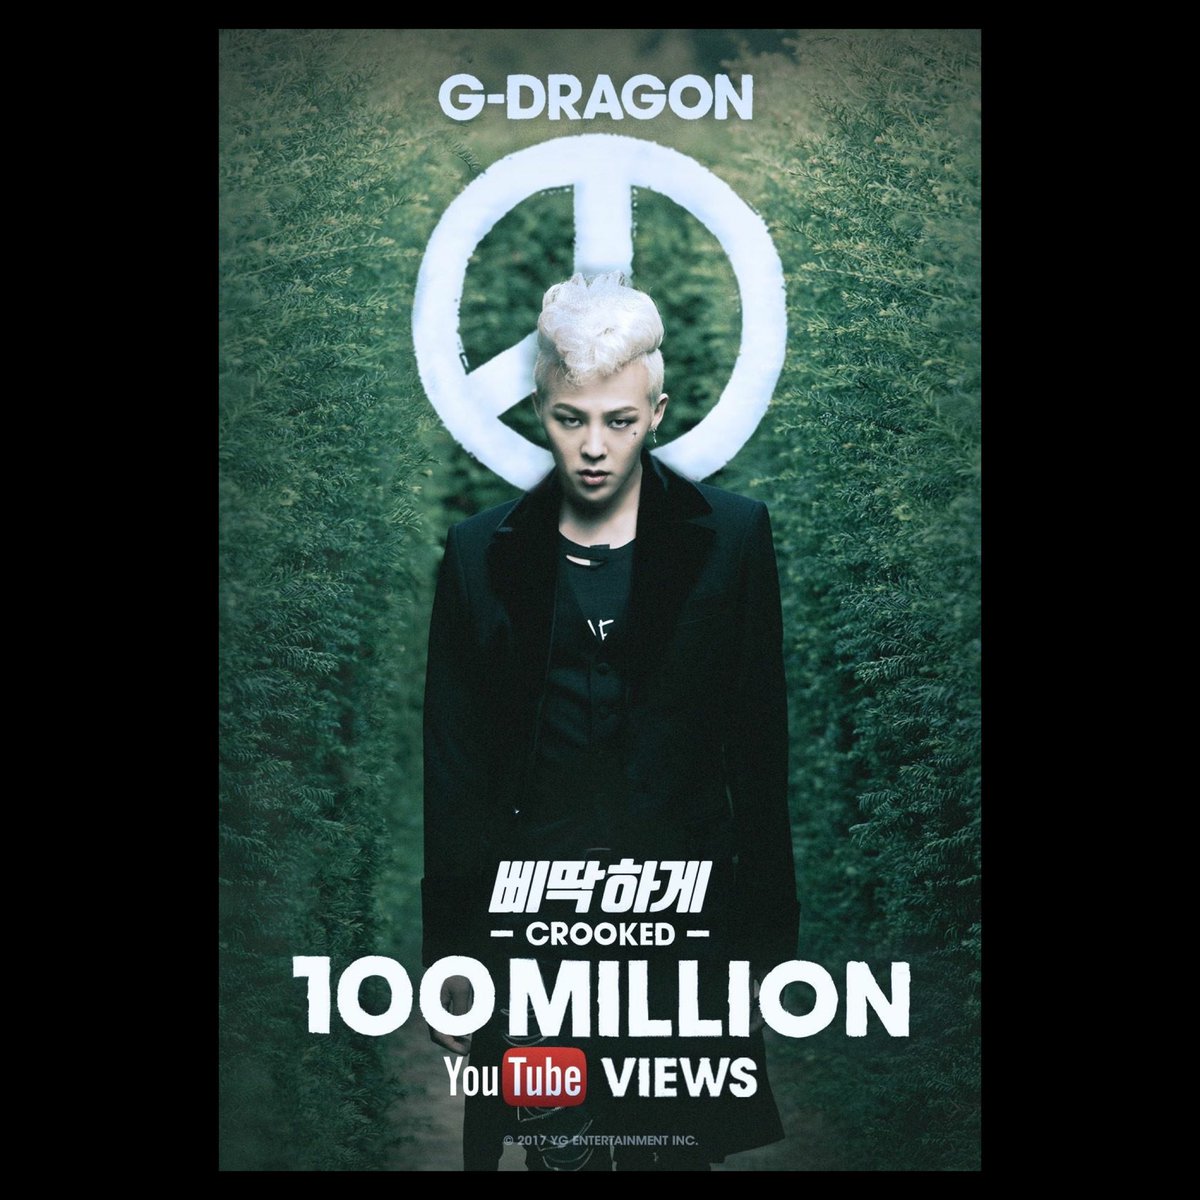 G-Dragon was the first male artist from a kpop group to surpass 100 MILLION views with 'crooked'. (now it's close to 200M, stream for clear skin)